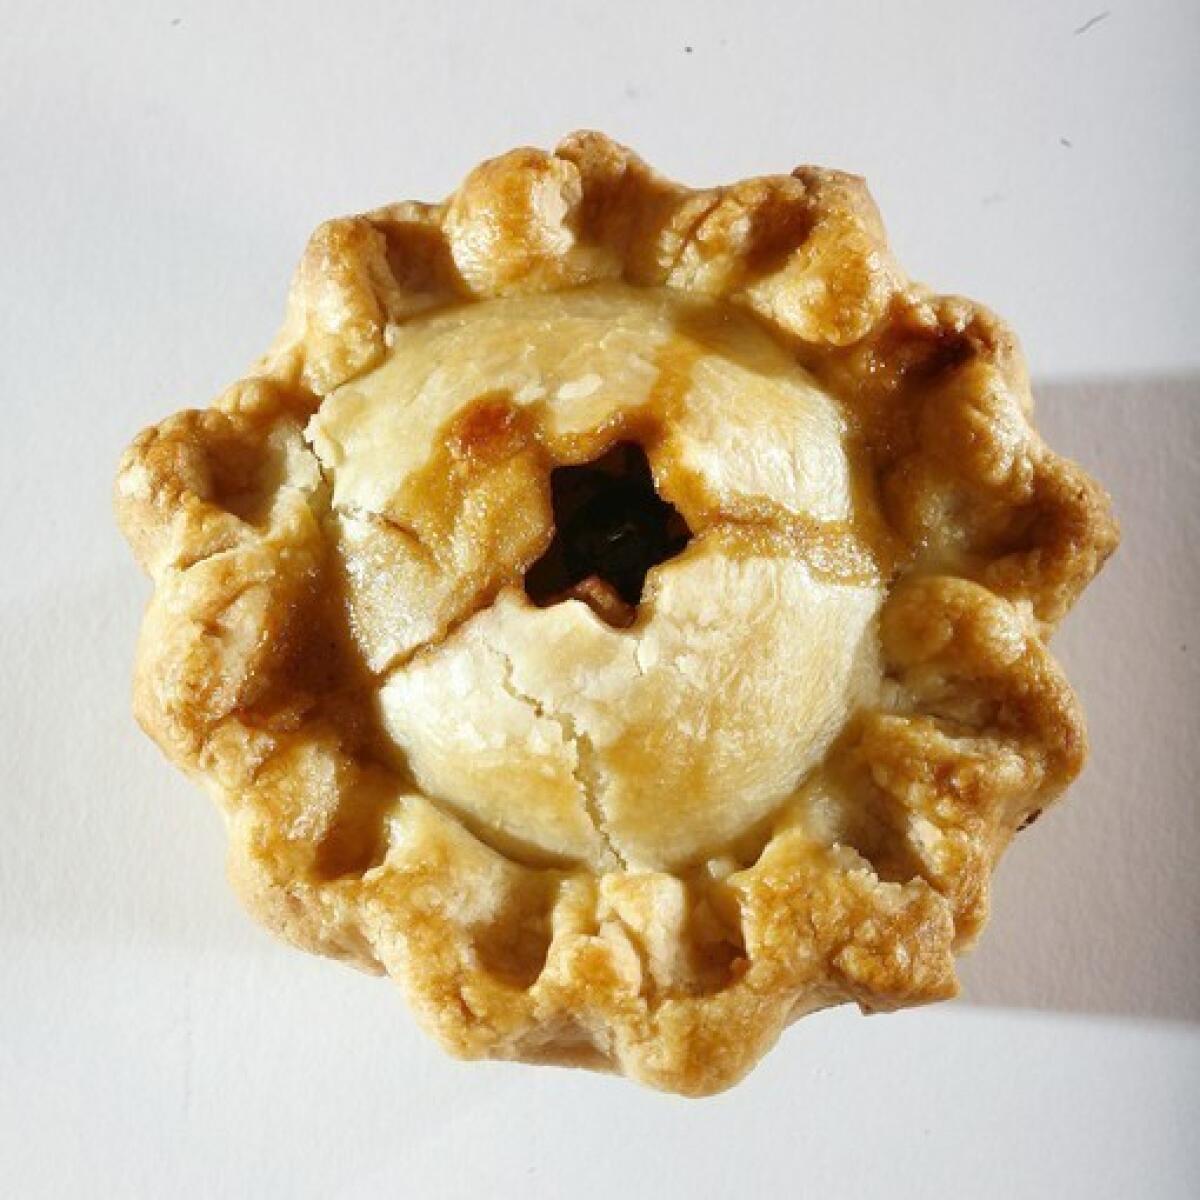 The apple mini-pie has a double crust and is loaded with rum-plumped raisins.